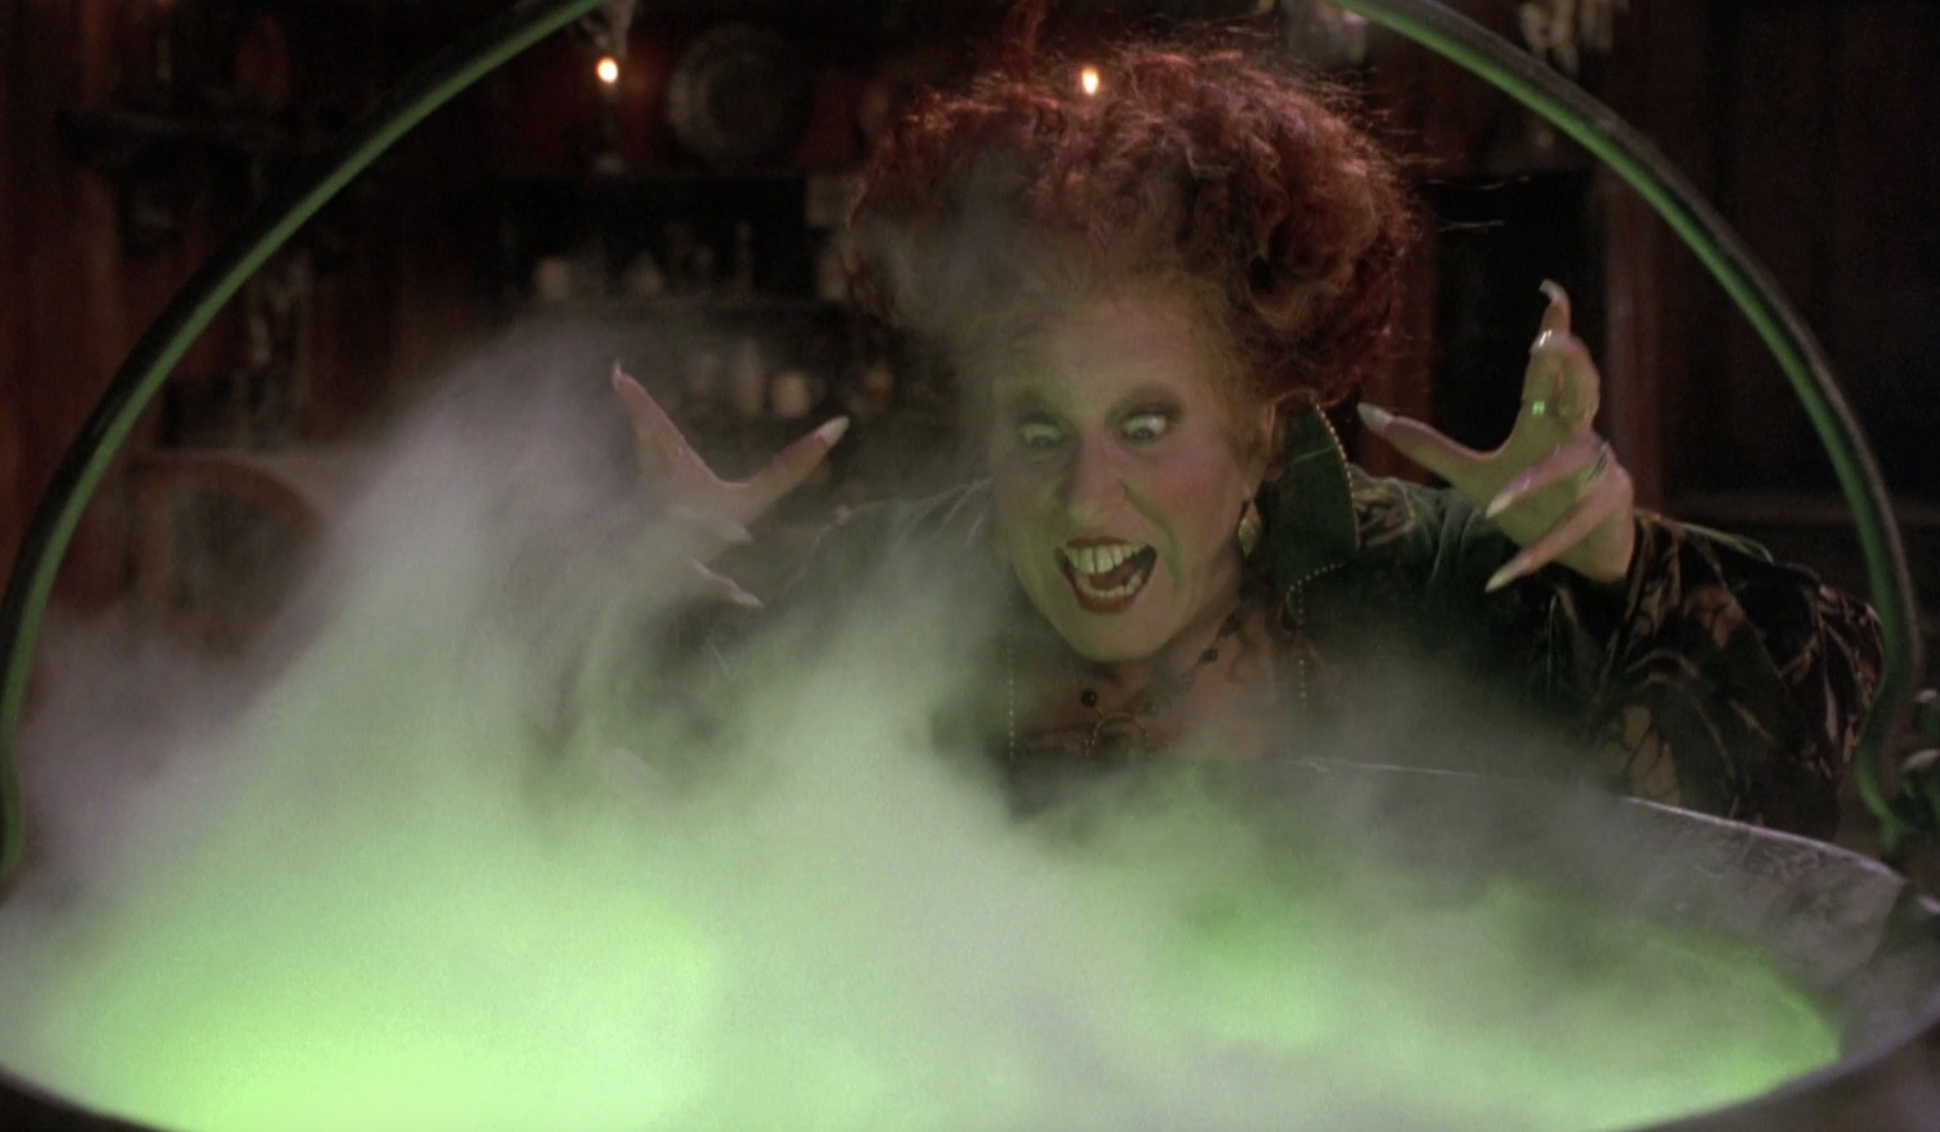 Hocus Pocus': 'I Put a Spell on You' Was Written Specifically With